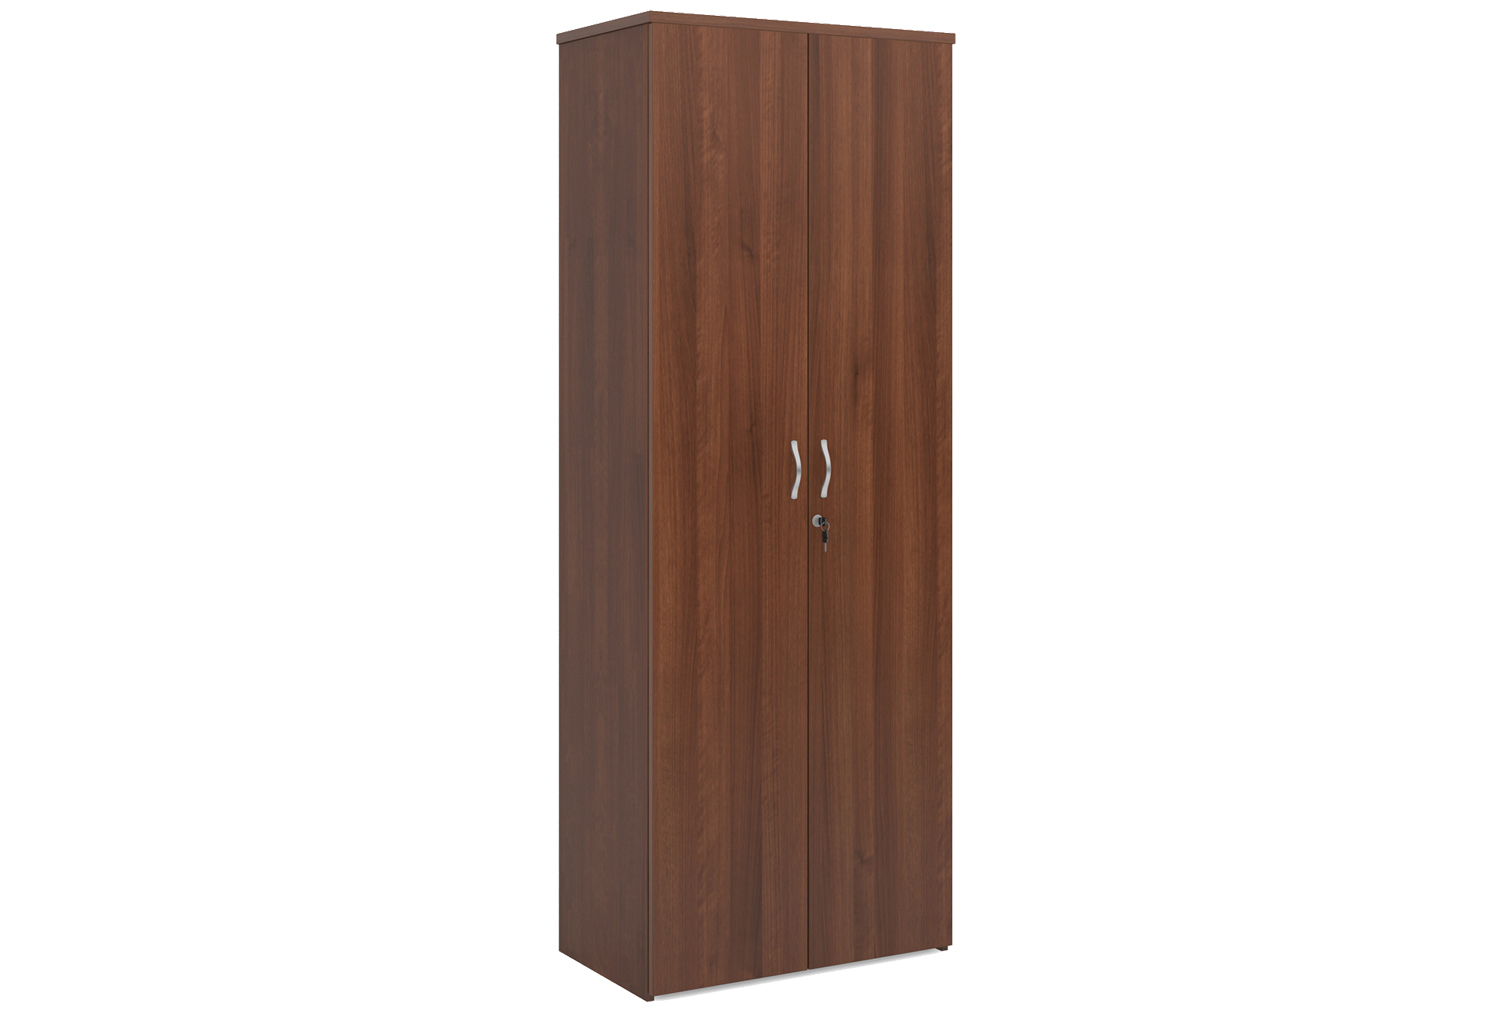 Tully Double Door Office Cupboards, 5 Shelf - 80wx47dx214h (cm), Walnut, Fully Installed